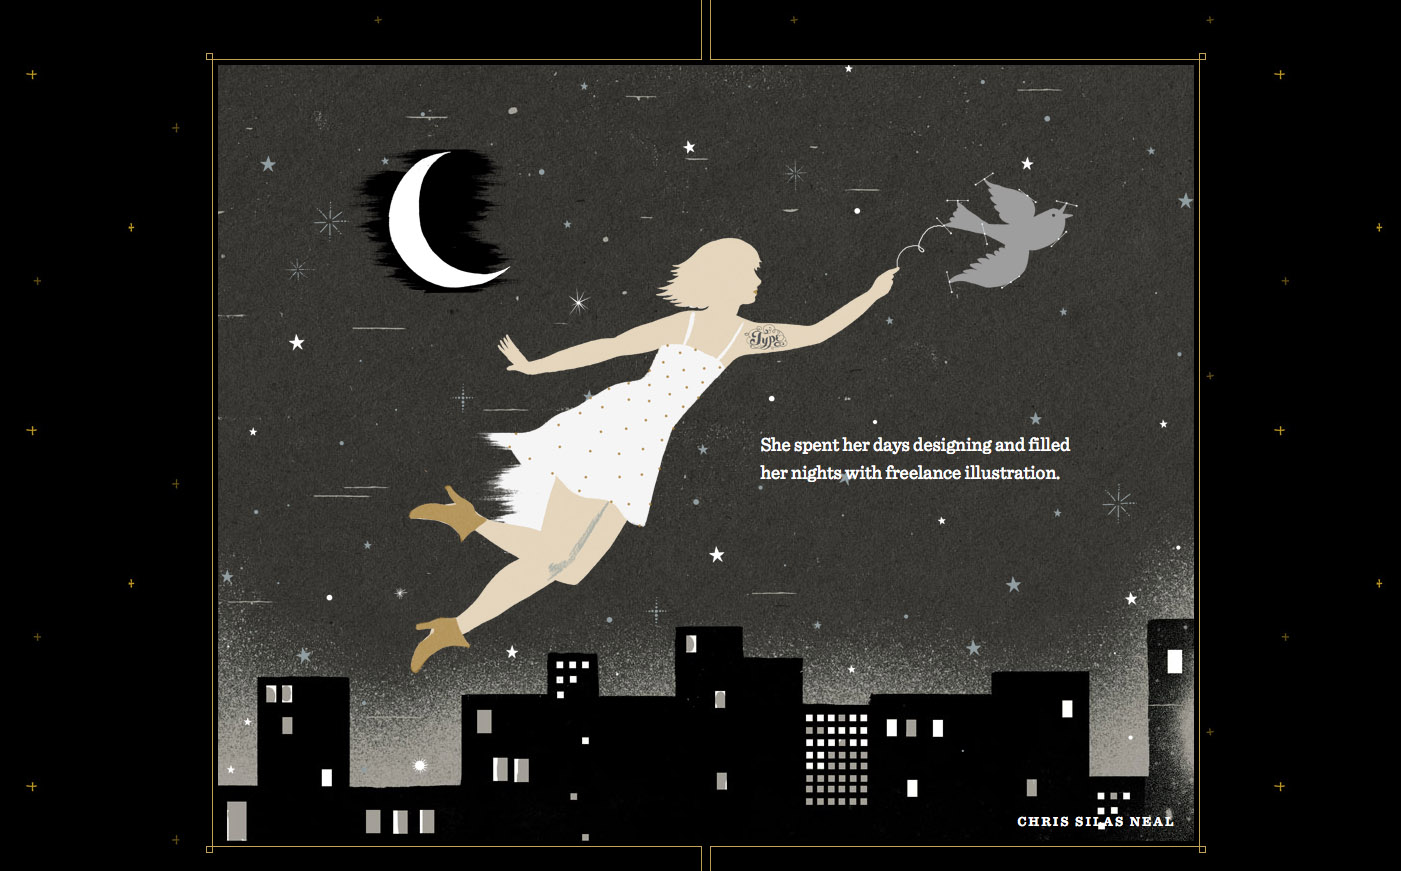 Screenshot shows an illustration of a woman in a white dress being carried by a swift over a city skyline at night